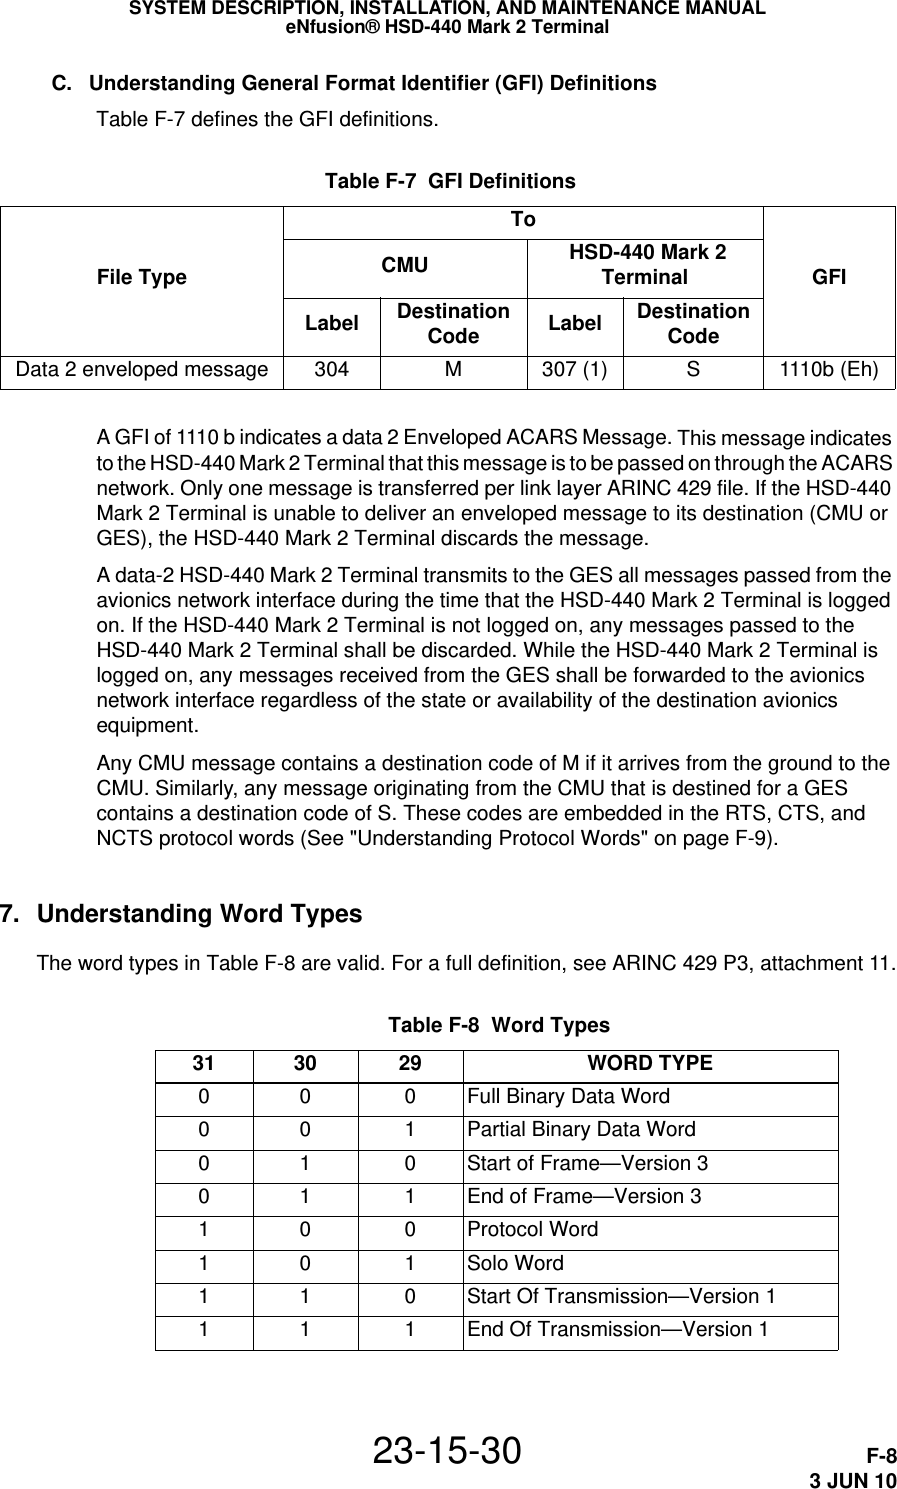 SYSTEM DESCRIPTION, INSTALLATION, AND MAINTENANCE MANUALeNfusion® HSD-440 Mark 2 Terminal23-15-30 F-83 JUN 10C. Understanding General Format Identifier (GFI) DefinitionsTable F-7 defines the GFI definitions. Table F-7  GFI Definitions File Type ToGFICMU   HSD-440 Mark 2 TerminalLabel  Destination Code Label Destination CodeData 2 enveloped message  304 M307 (1) S1110b (Eh)A GFI of 1110 b indicates a data 2 Enveloped ACARS Message. This message indicates to the HSD-440 Mark 2 Terminal that this message is to be passed on through the ACARS network. Only one message is transferred per link layer ARINC 429 file. If the HSD-440 Mark 2 Terminal is unable to deliver an enveloped message to its destination (CMU or GES), the HSD-440 Mark 2 Terminal discards the message.A data-2 HSD-440 Mark 2 Terminal transmits to the GES all messages passed from the avionics network interface during the time that the HSD-440 Mark 2 Terminal is logged on. If the HSD-440 Mark 2 Terminal is not logged on, any messages passed to the HSD-440 Mark 2 Terminal shall be discarded. While the HSD-440 Mark 2 Terminal is logged on, any messages received from the GES shall be forwarded to the avionics network interface regardless of the state or availability of the destination avionics equipment.Any CMU message contains a destination code of M if it arrives from the ground to the CMU. Similarly, any message originating from the CMU that is destined for a GES contains a destination code of S. These codes are embedded in the RTS, CTS, and NCTS protocol words (See &quot;Understanding Protocol Words&quot; on page F-9).7. Understanding Word TypesThe word types in Table F-8 are valid. For a full definition, see ARINC 429 P3, attachment 11. Table F-8  Word Types 31  30  29  WORD TYPE 0  0  0  Full Binary Data Word 0  0  1  Partial Binary Data Word 0  1  0  Start of Frame—Version 3 0  1  1  End of Frame—Version 3 1  0  0  Protocol Word 1  0  1  Solo Word1  1  0  Start Of Transmission—Version 1 1  1  1  End Of Transmission—Version 1 